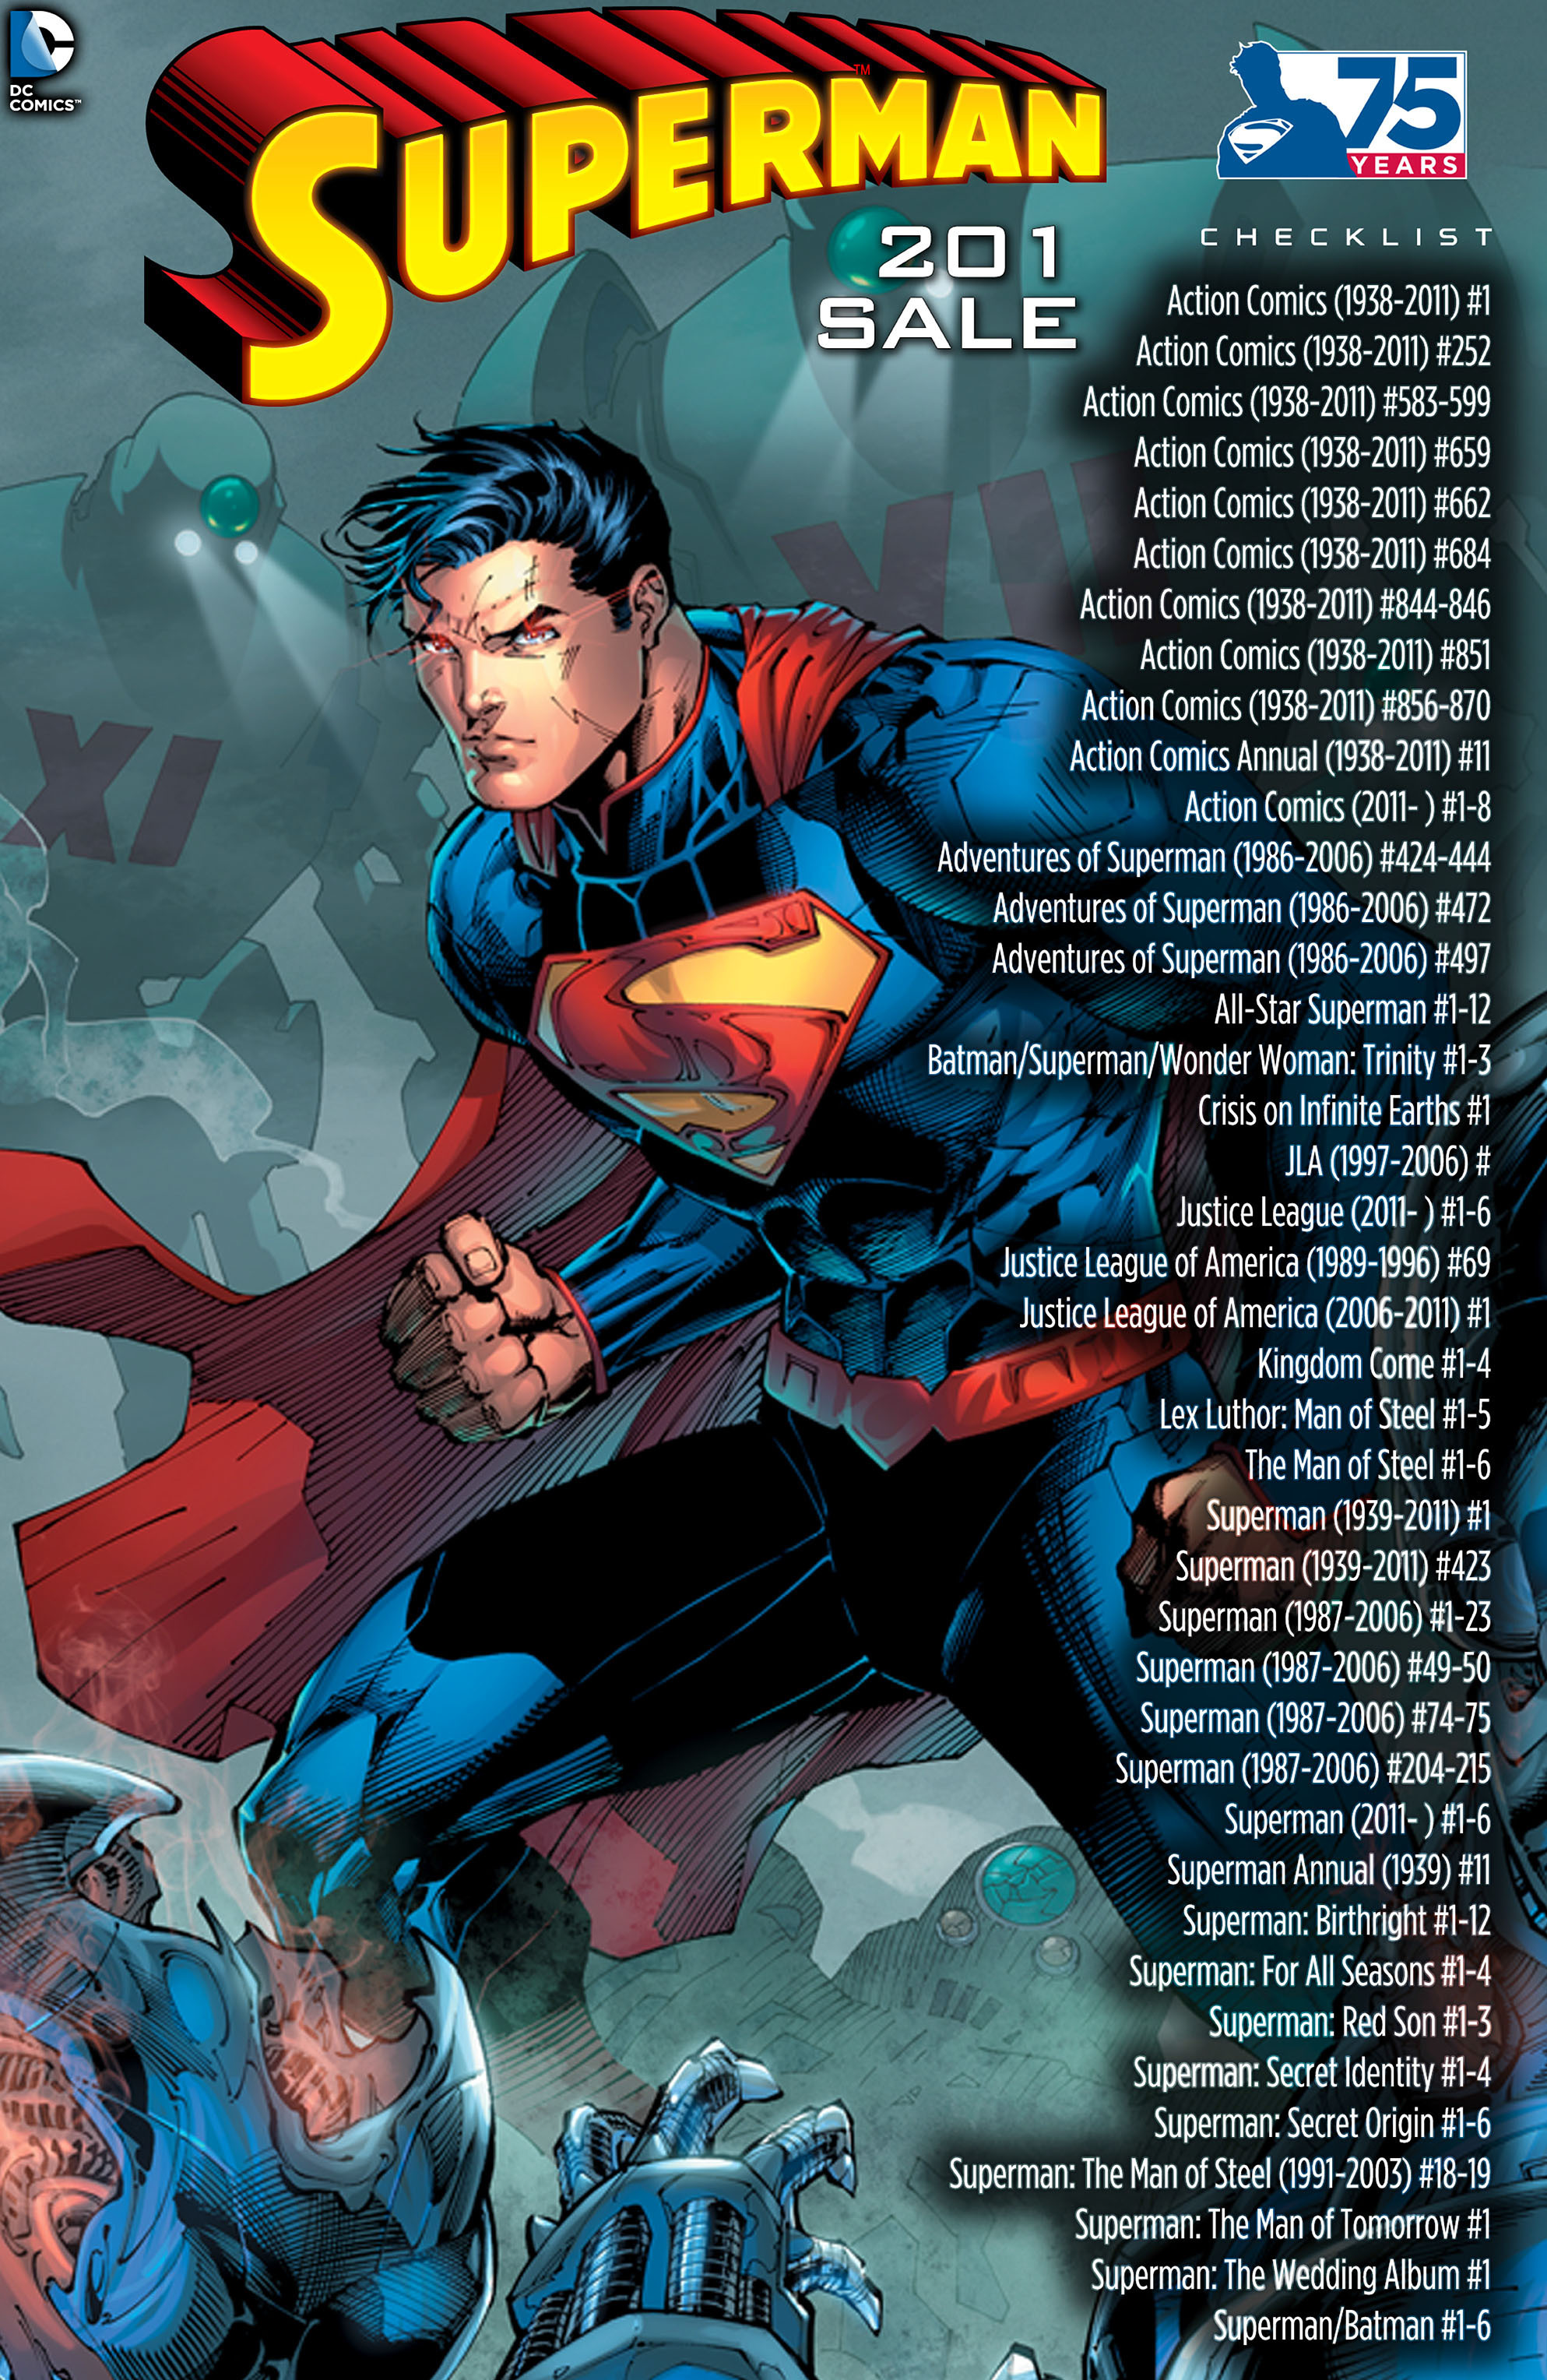 Read online Superman (2011) comic -  Issue # _Special - Superman 201 - 3